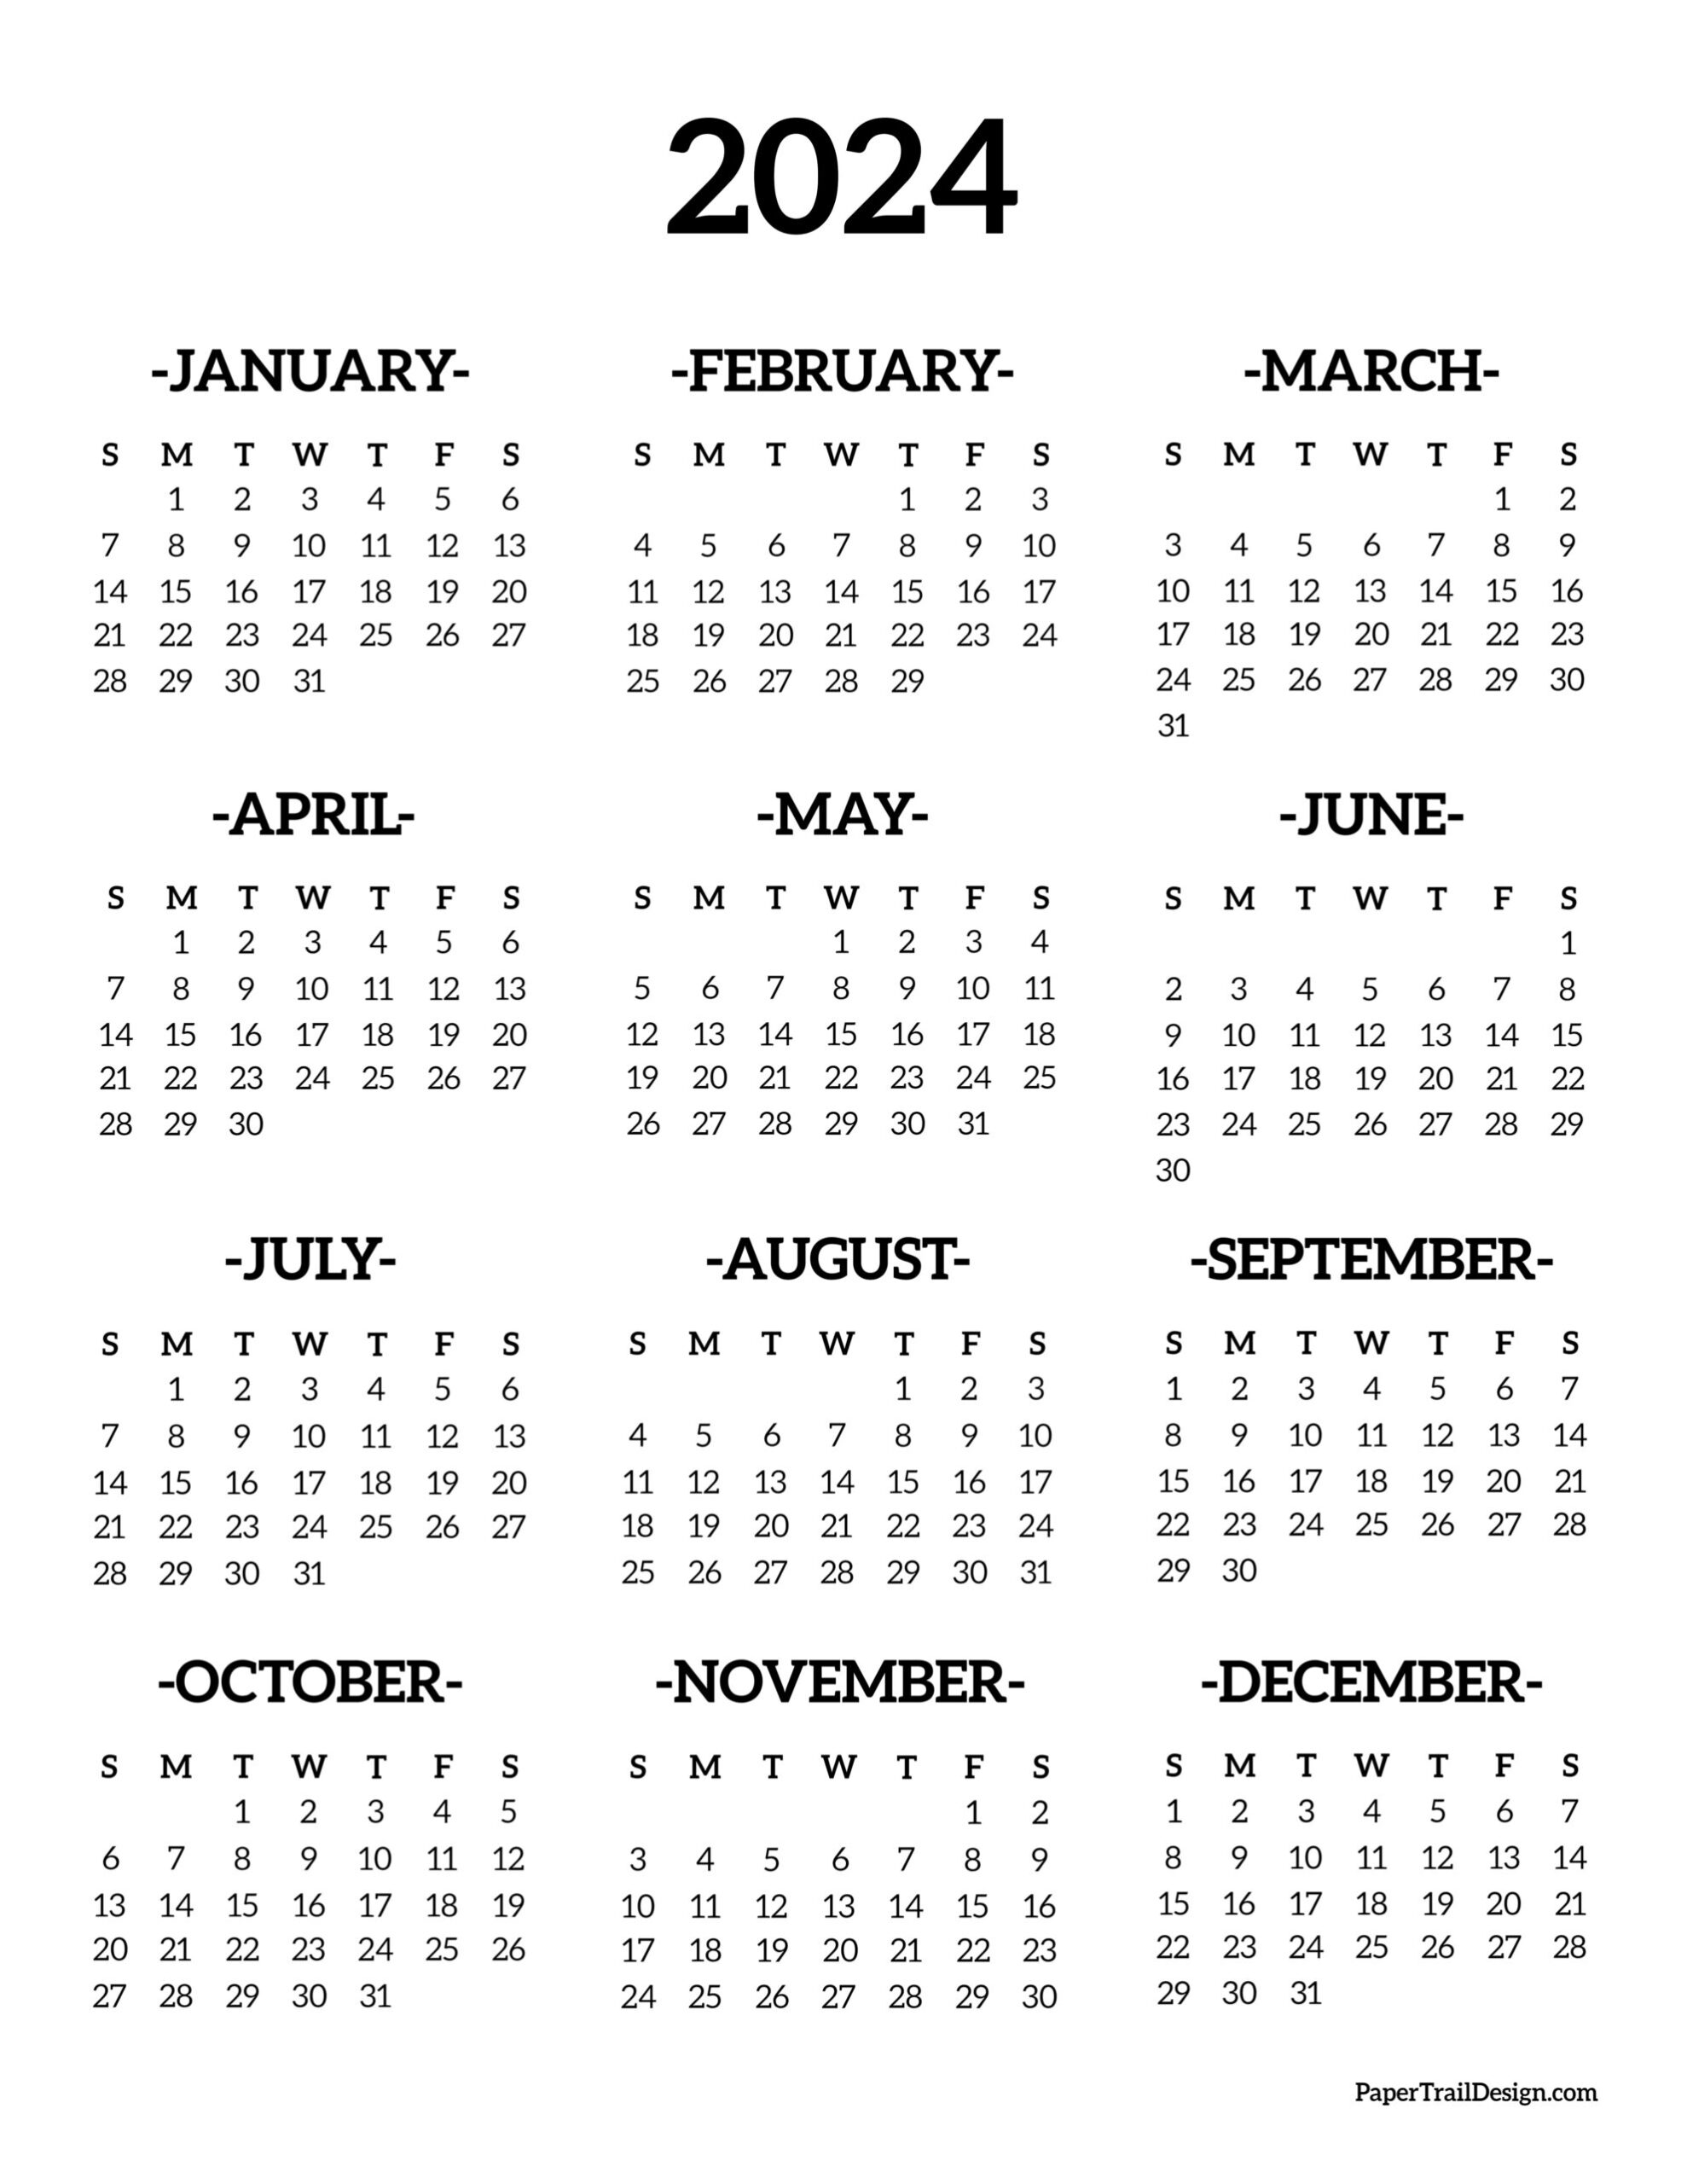 Calendar 2024 Printable One Page - Paper Trail Design for Free 2024 Year Calendar Printable